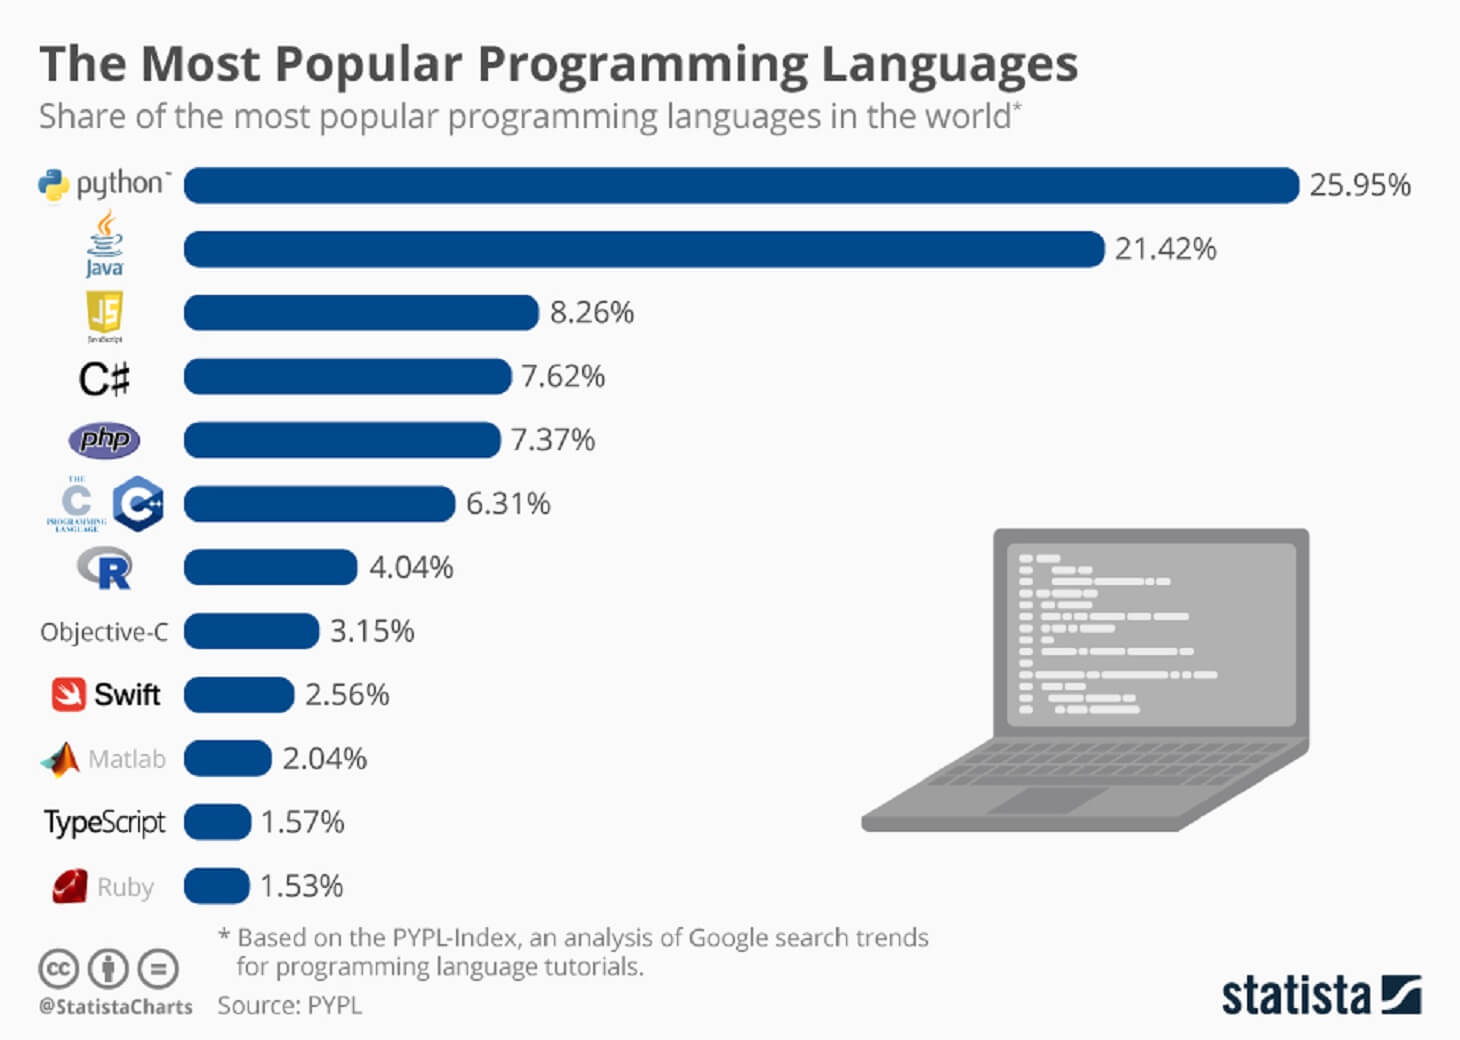 The most popular programming languages